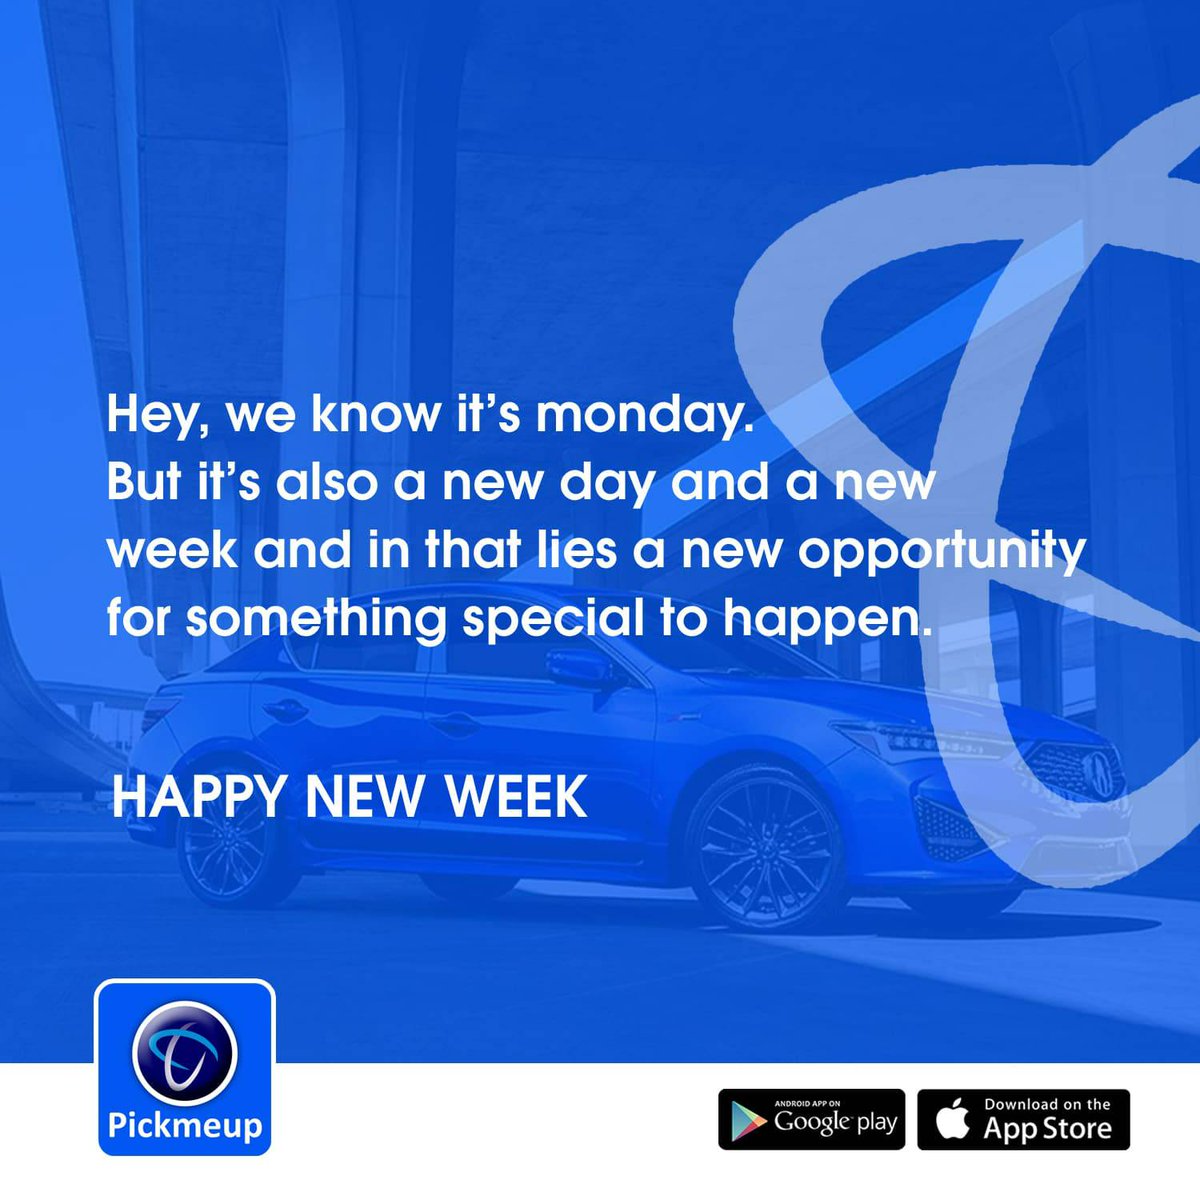 Happy New Week! New vveek, New opportunities. It's bright on this side, let @pickmeupng brighton ur day😁 Go with the blue App today & rideSmart. To get started, download the 'Pickmeup App' if you haven't 😌 #ride #monday For further inquiries visit pickmeup.ng